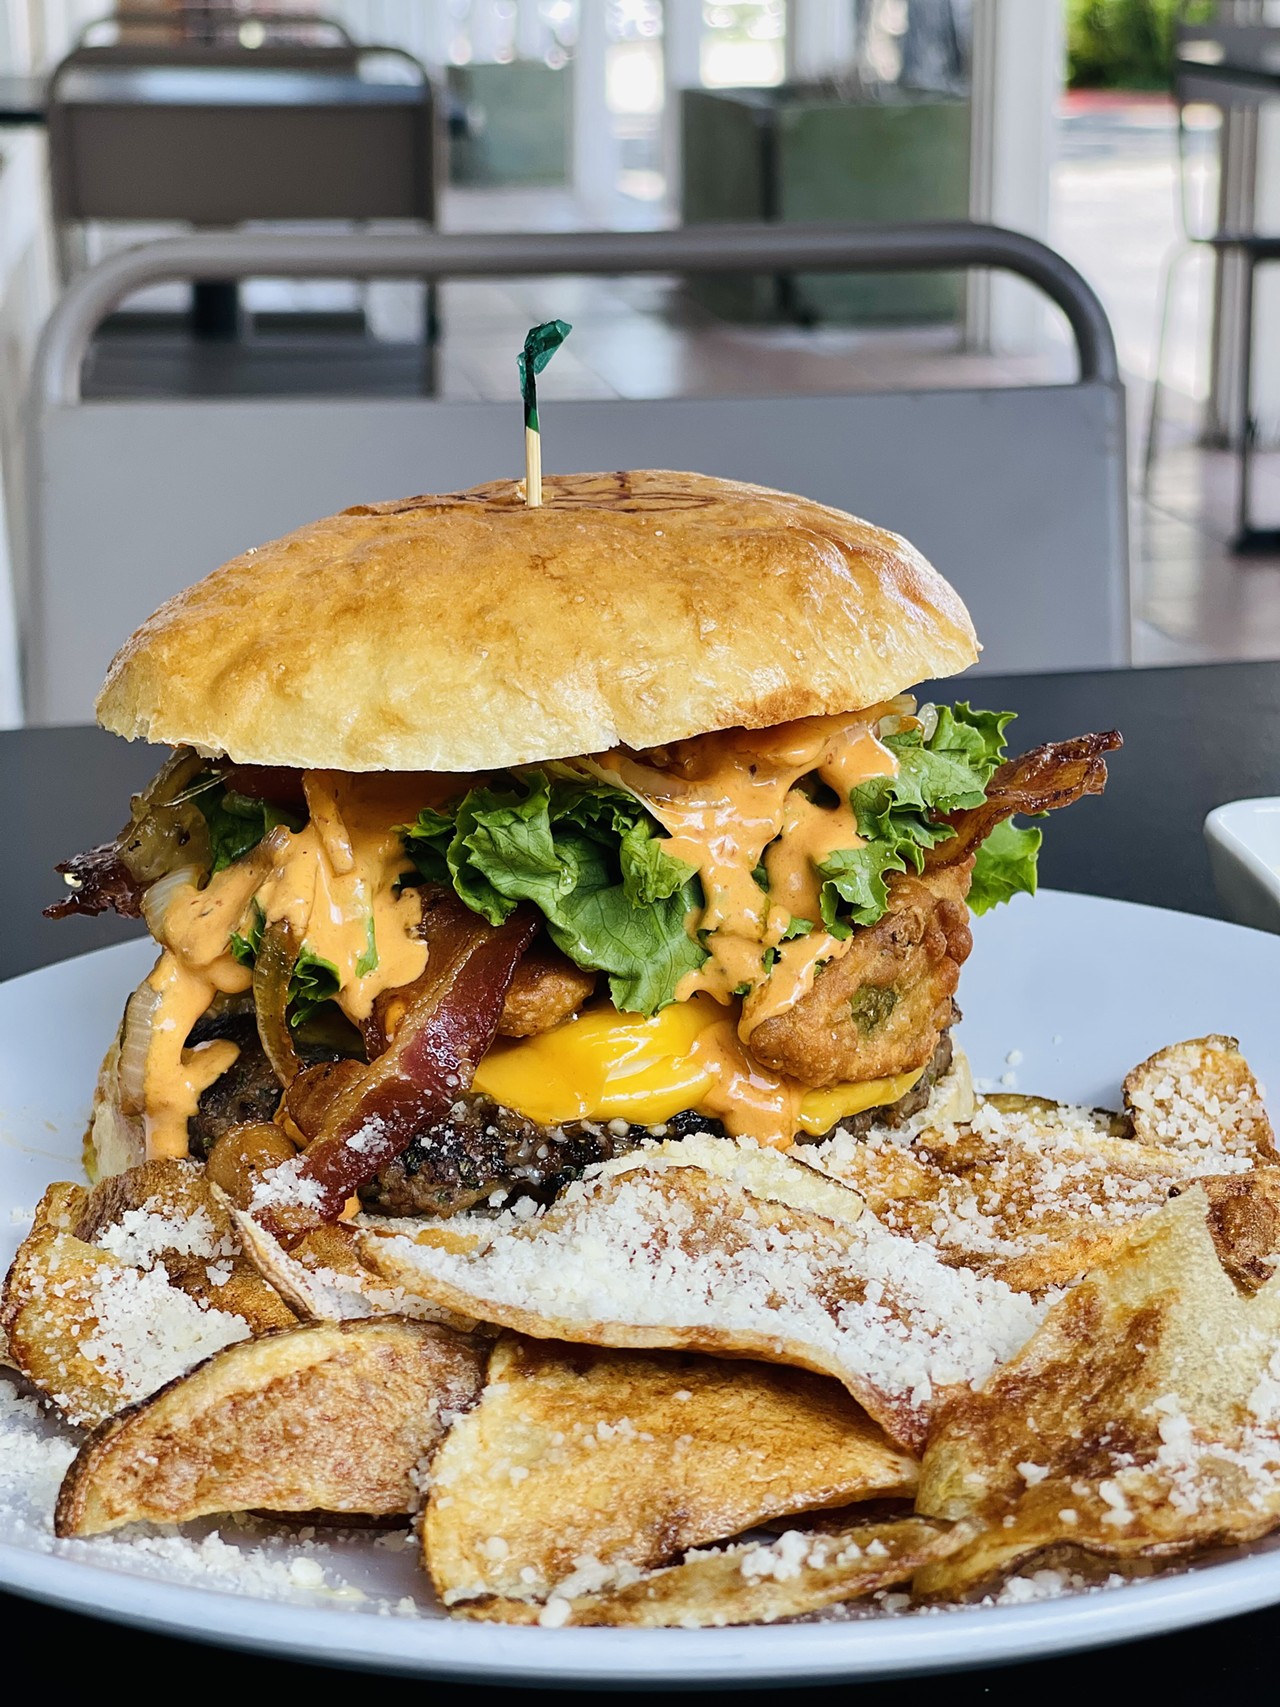 Fonda Nostra Bistro
3615 Broadway UNIT 4
$12 Honey Boulevard BurgerHomemade buns, Ground Beef patty, Bacon, cream cheese, American cheese, fried avocado, caramelized onions in Jack Daniel’s honey, chipotle Mayo, ketchup, lettuce and tomato and Parmesan steak fries.